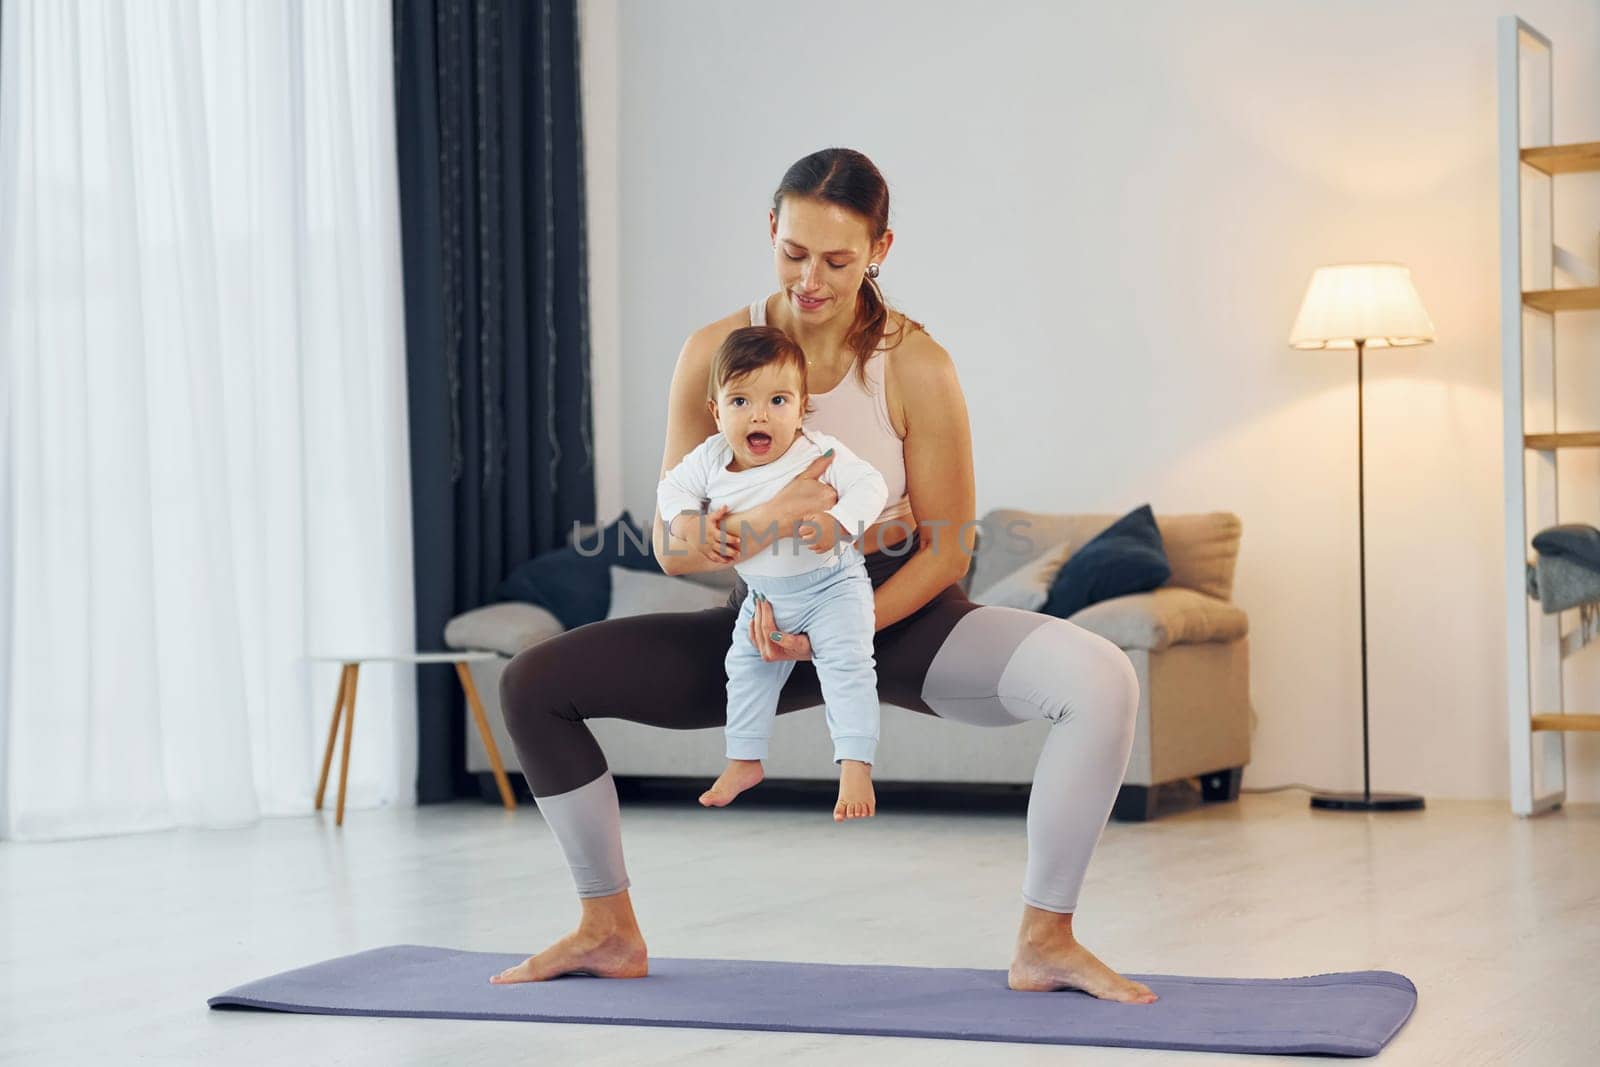 Teaching fitness. Mother with her little daughter is at home together.